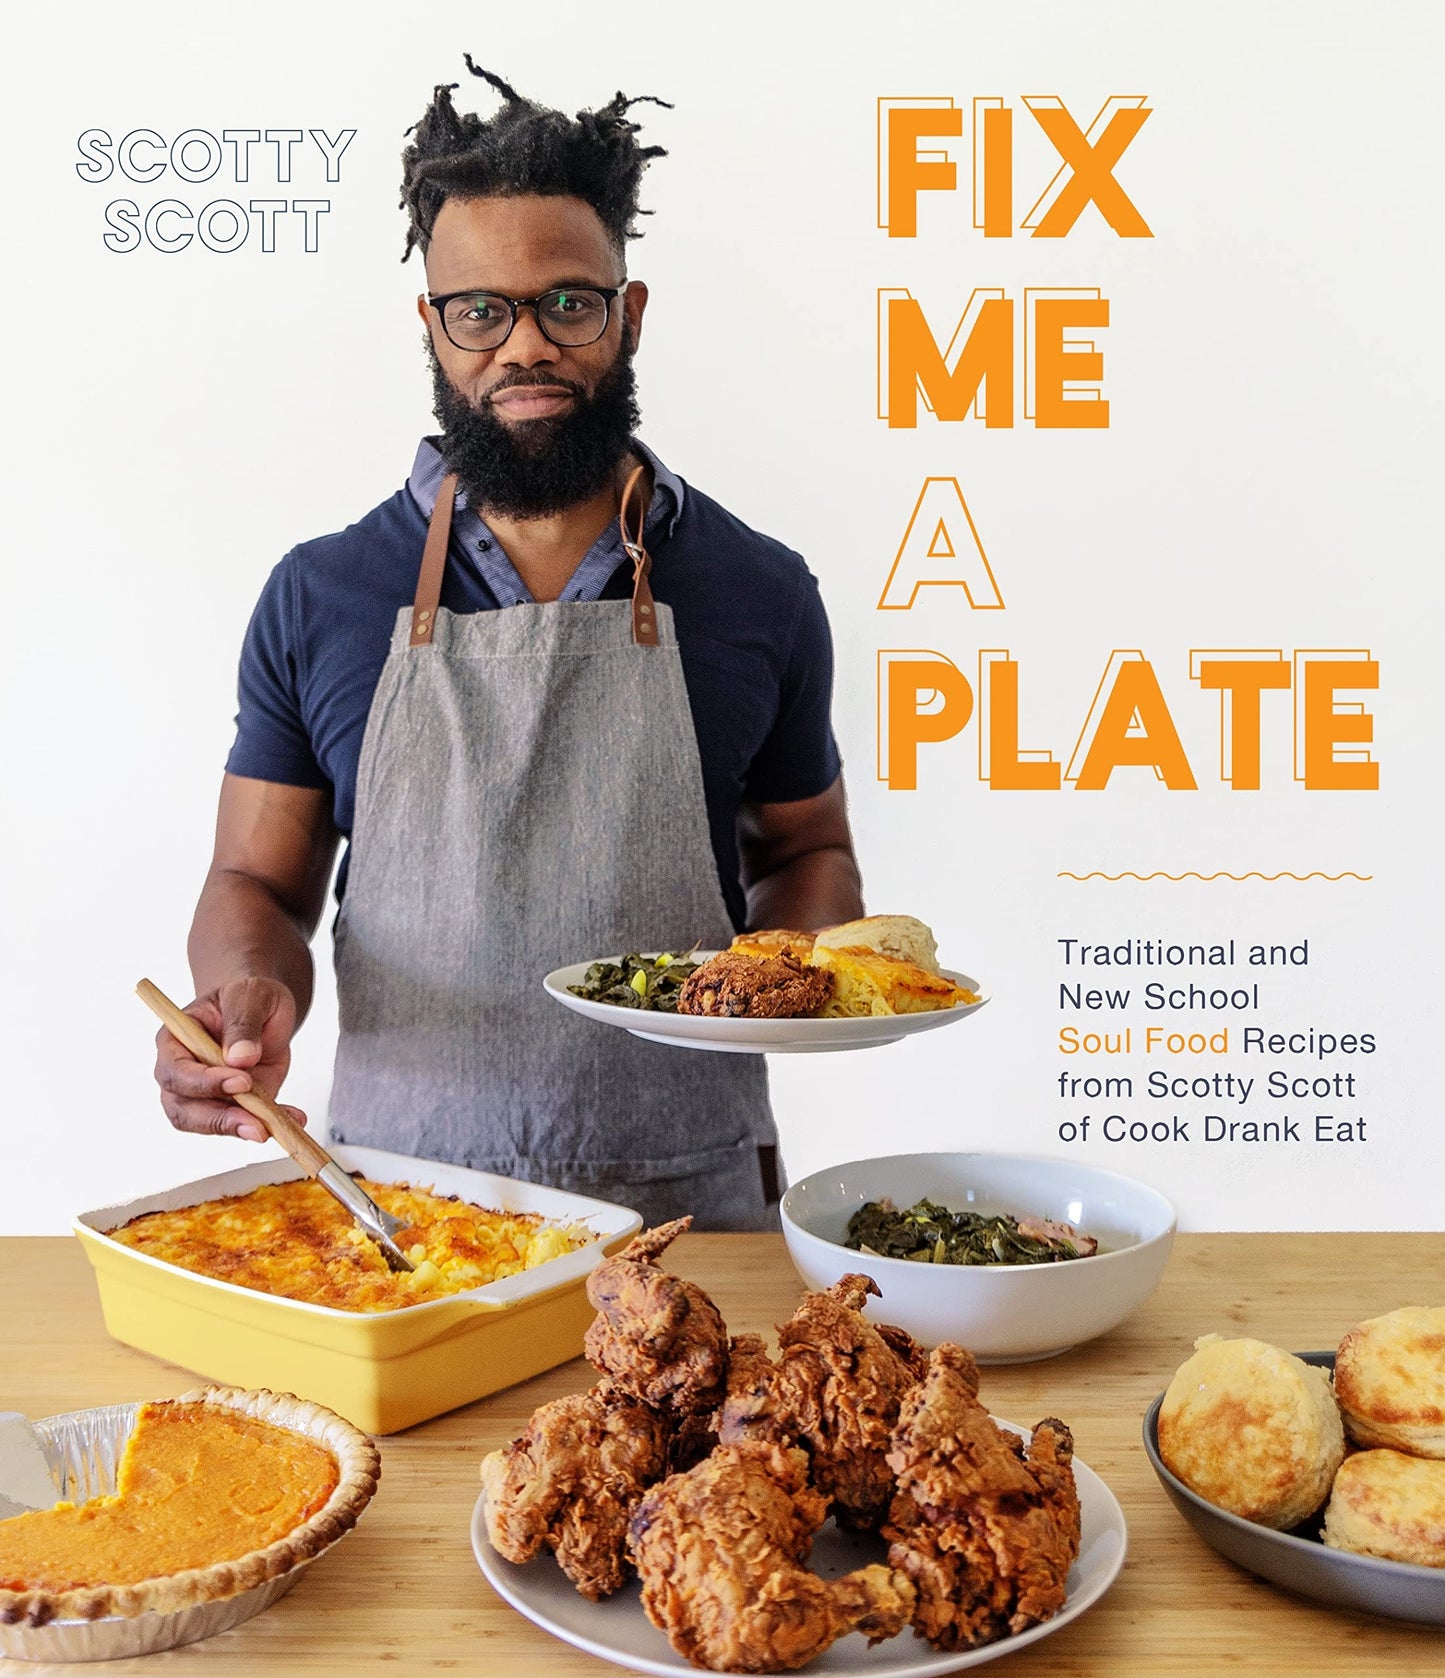 Fix Me a Plate // Traditional and New School Soul Food Recipes from Scotty Scott of Cook Drank Eat